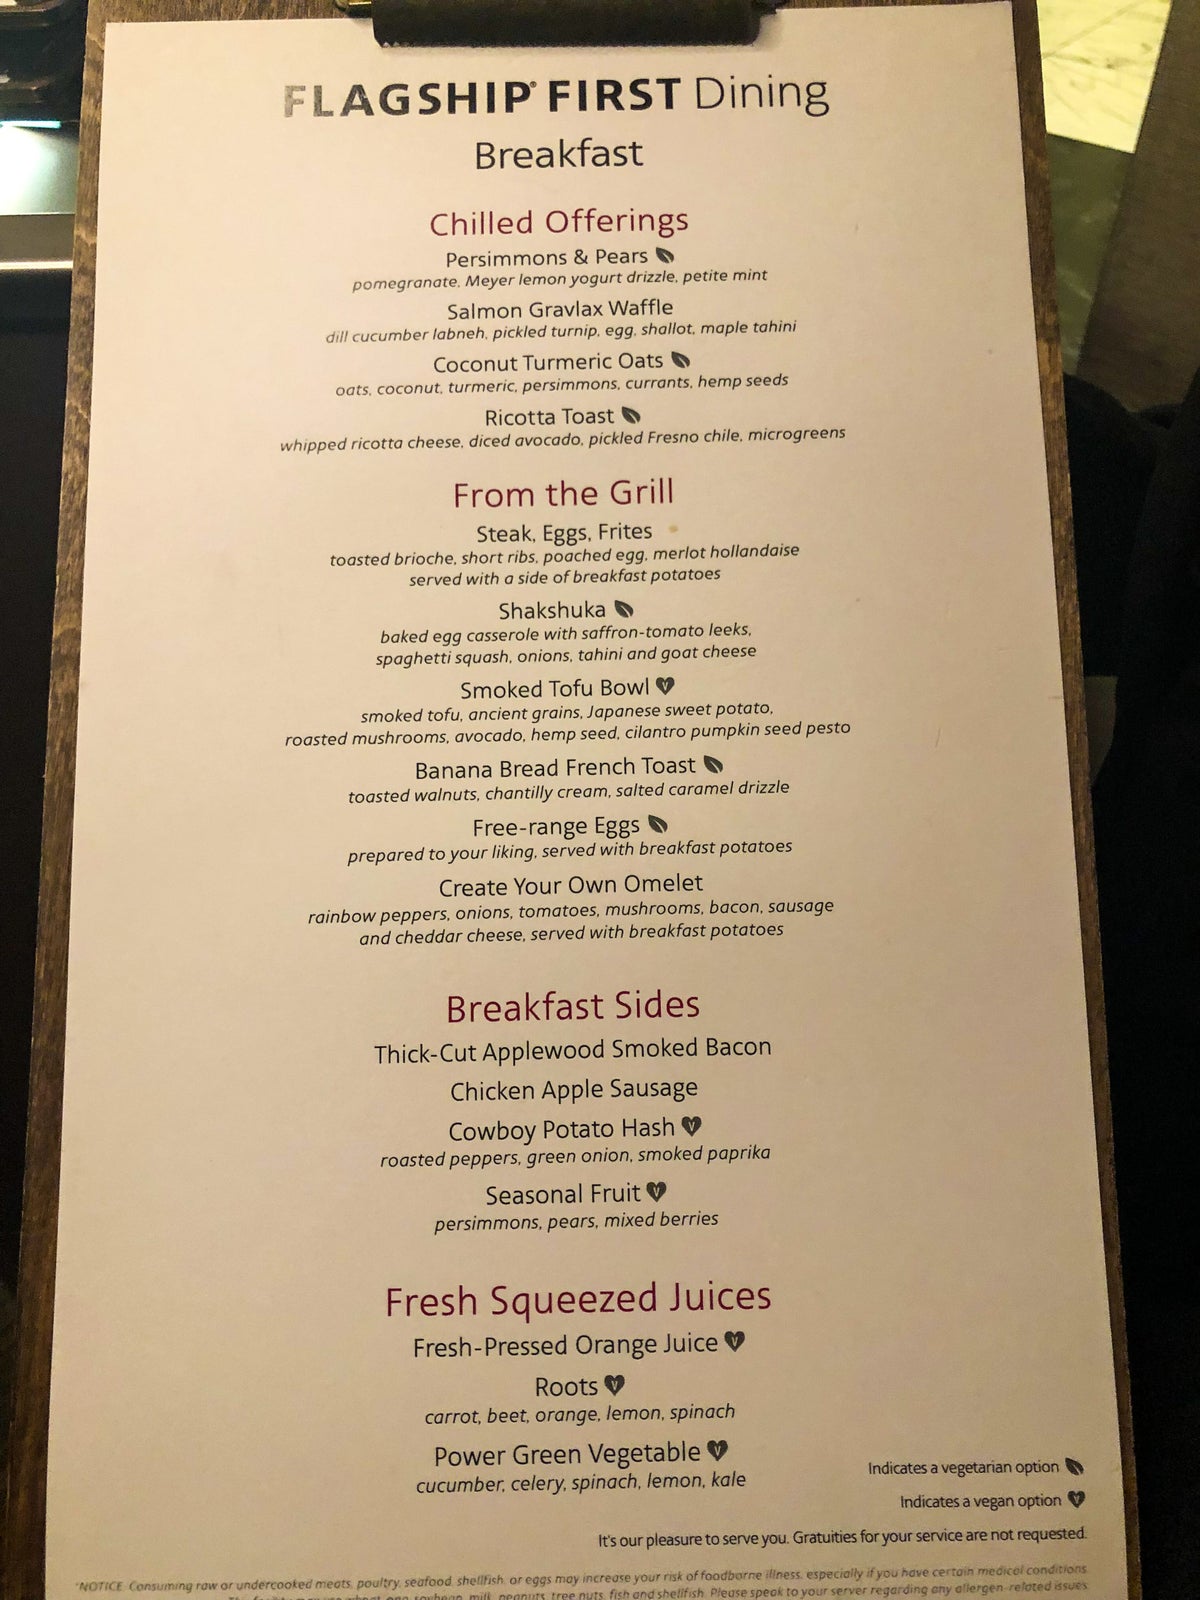 American Airlines Flagship First Dining LAX breakfast menu